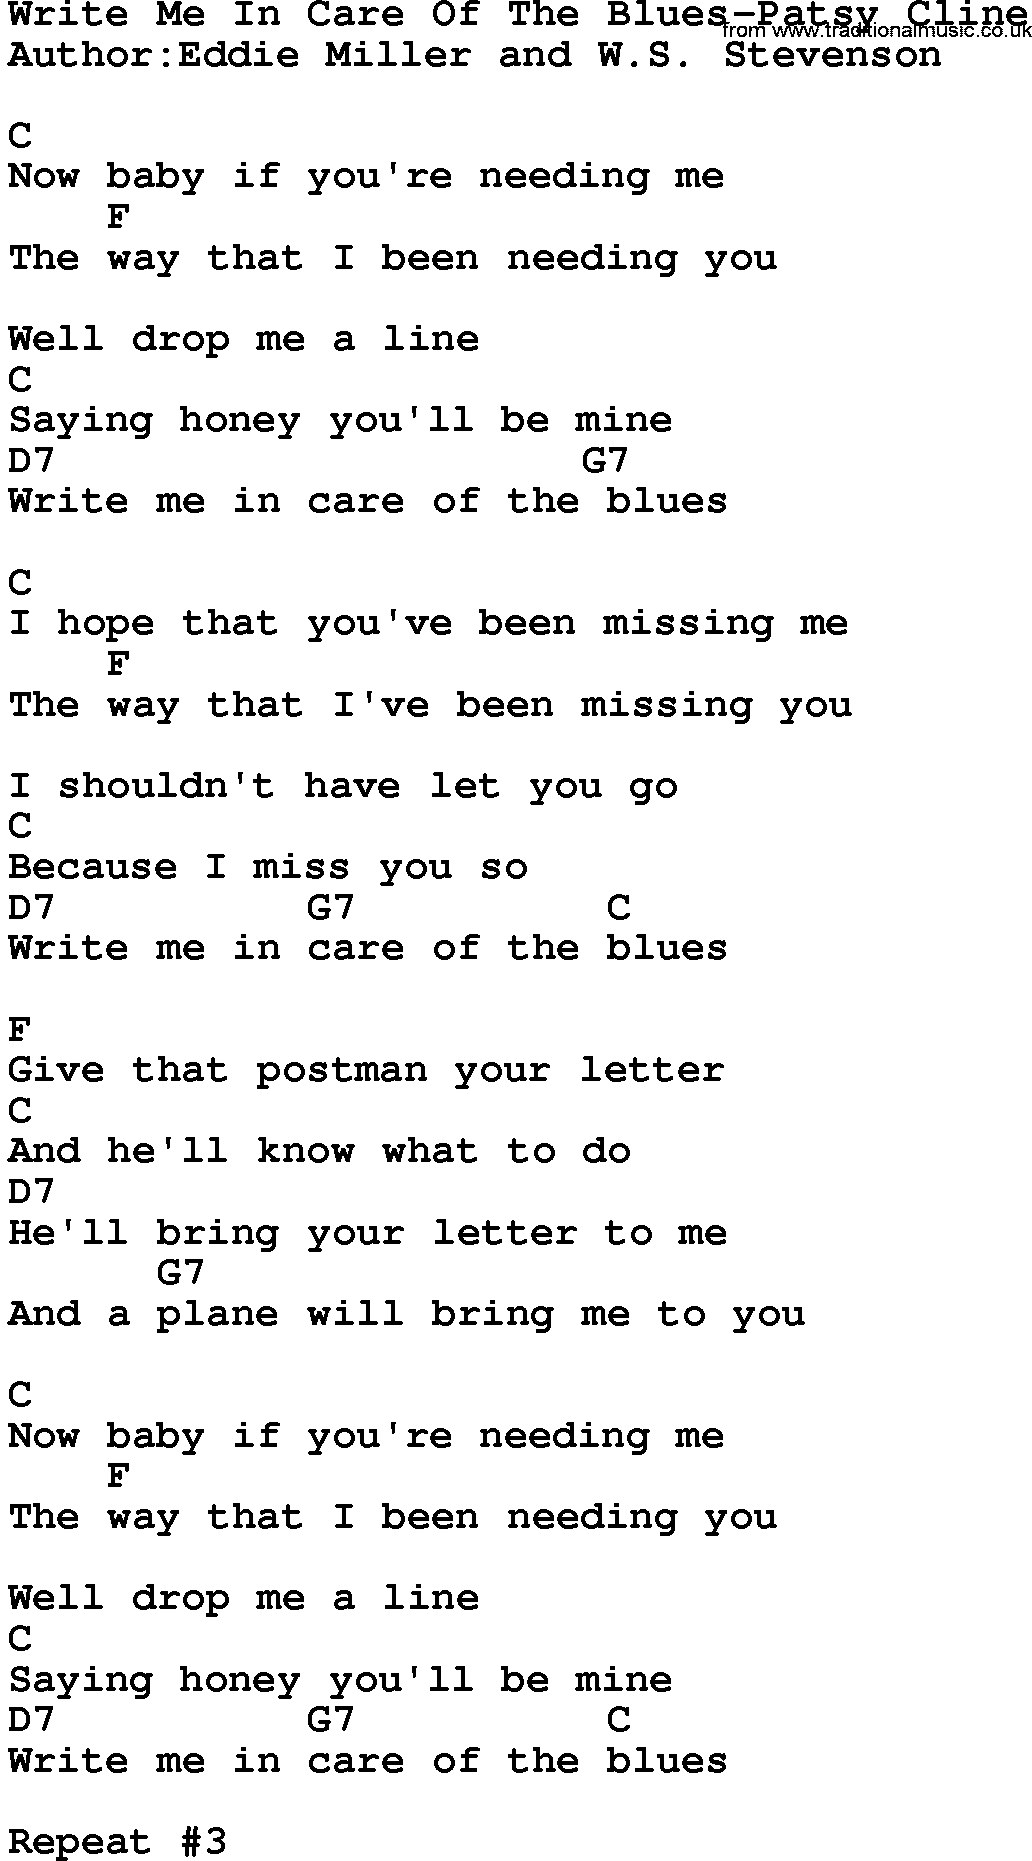 Country music song: Write Me In Care Of The Blues-Patsy Cline lyrics and chords